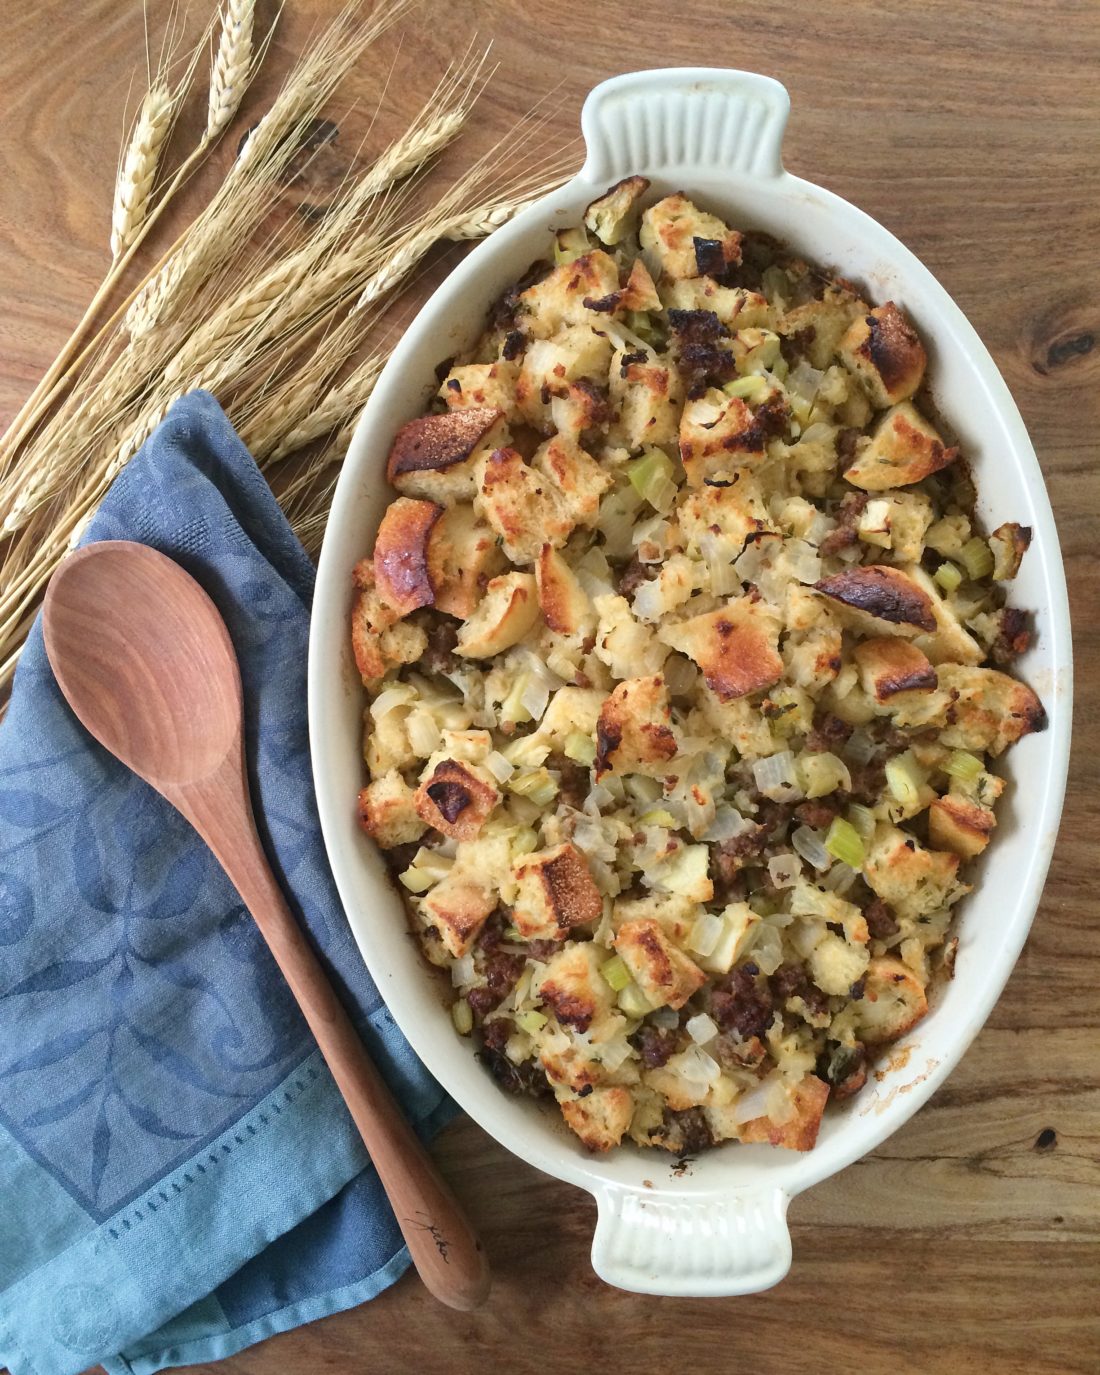 Eva Amurri Martino shares her famous Sausage & Thyme Stuffing recipe as a Thanksgiving Side to make this year